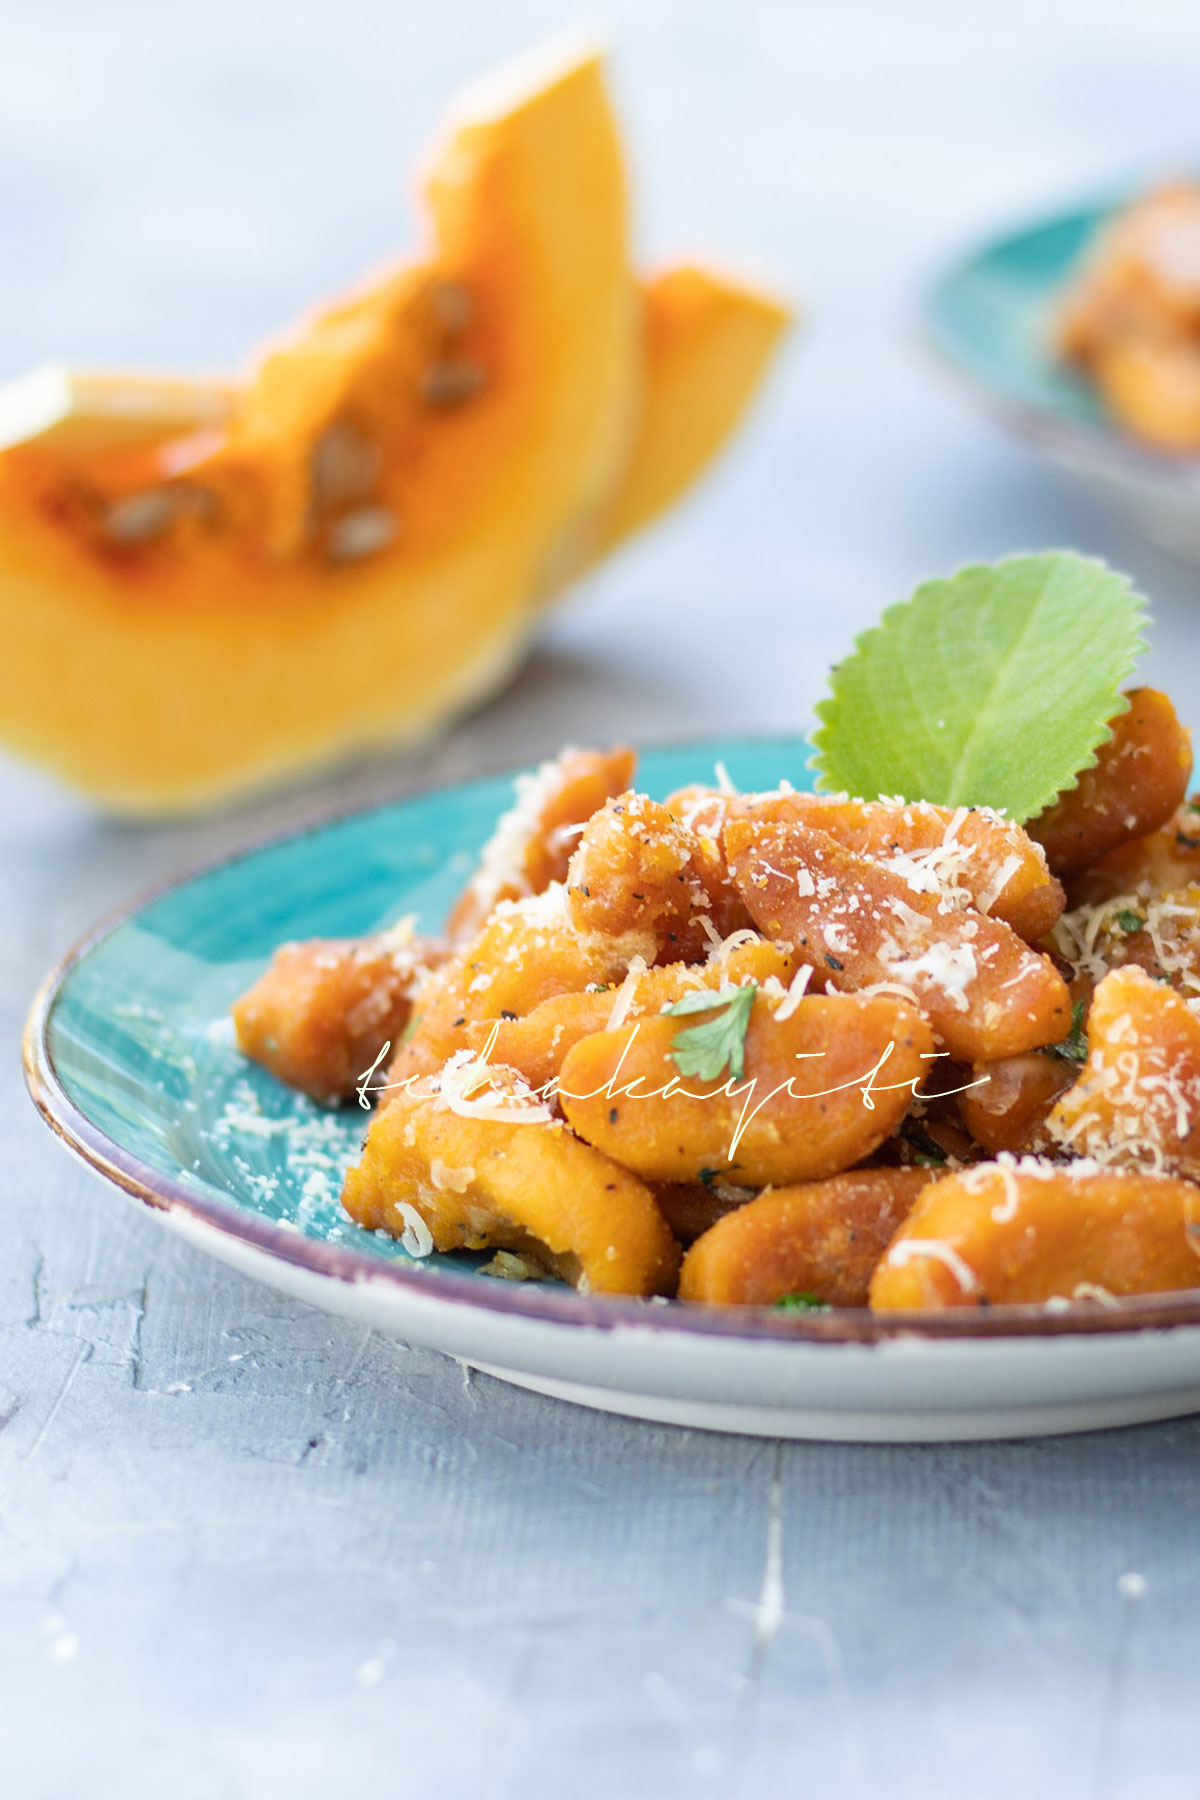 Pumpkin gnocchi, the best of Fall in your plate. | tchakayiti.com